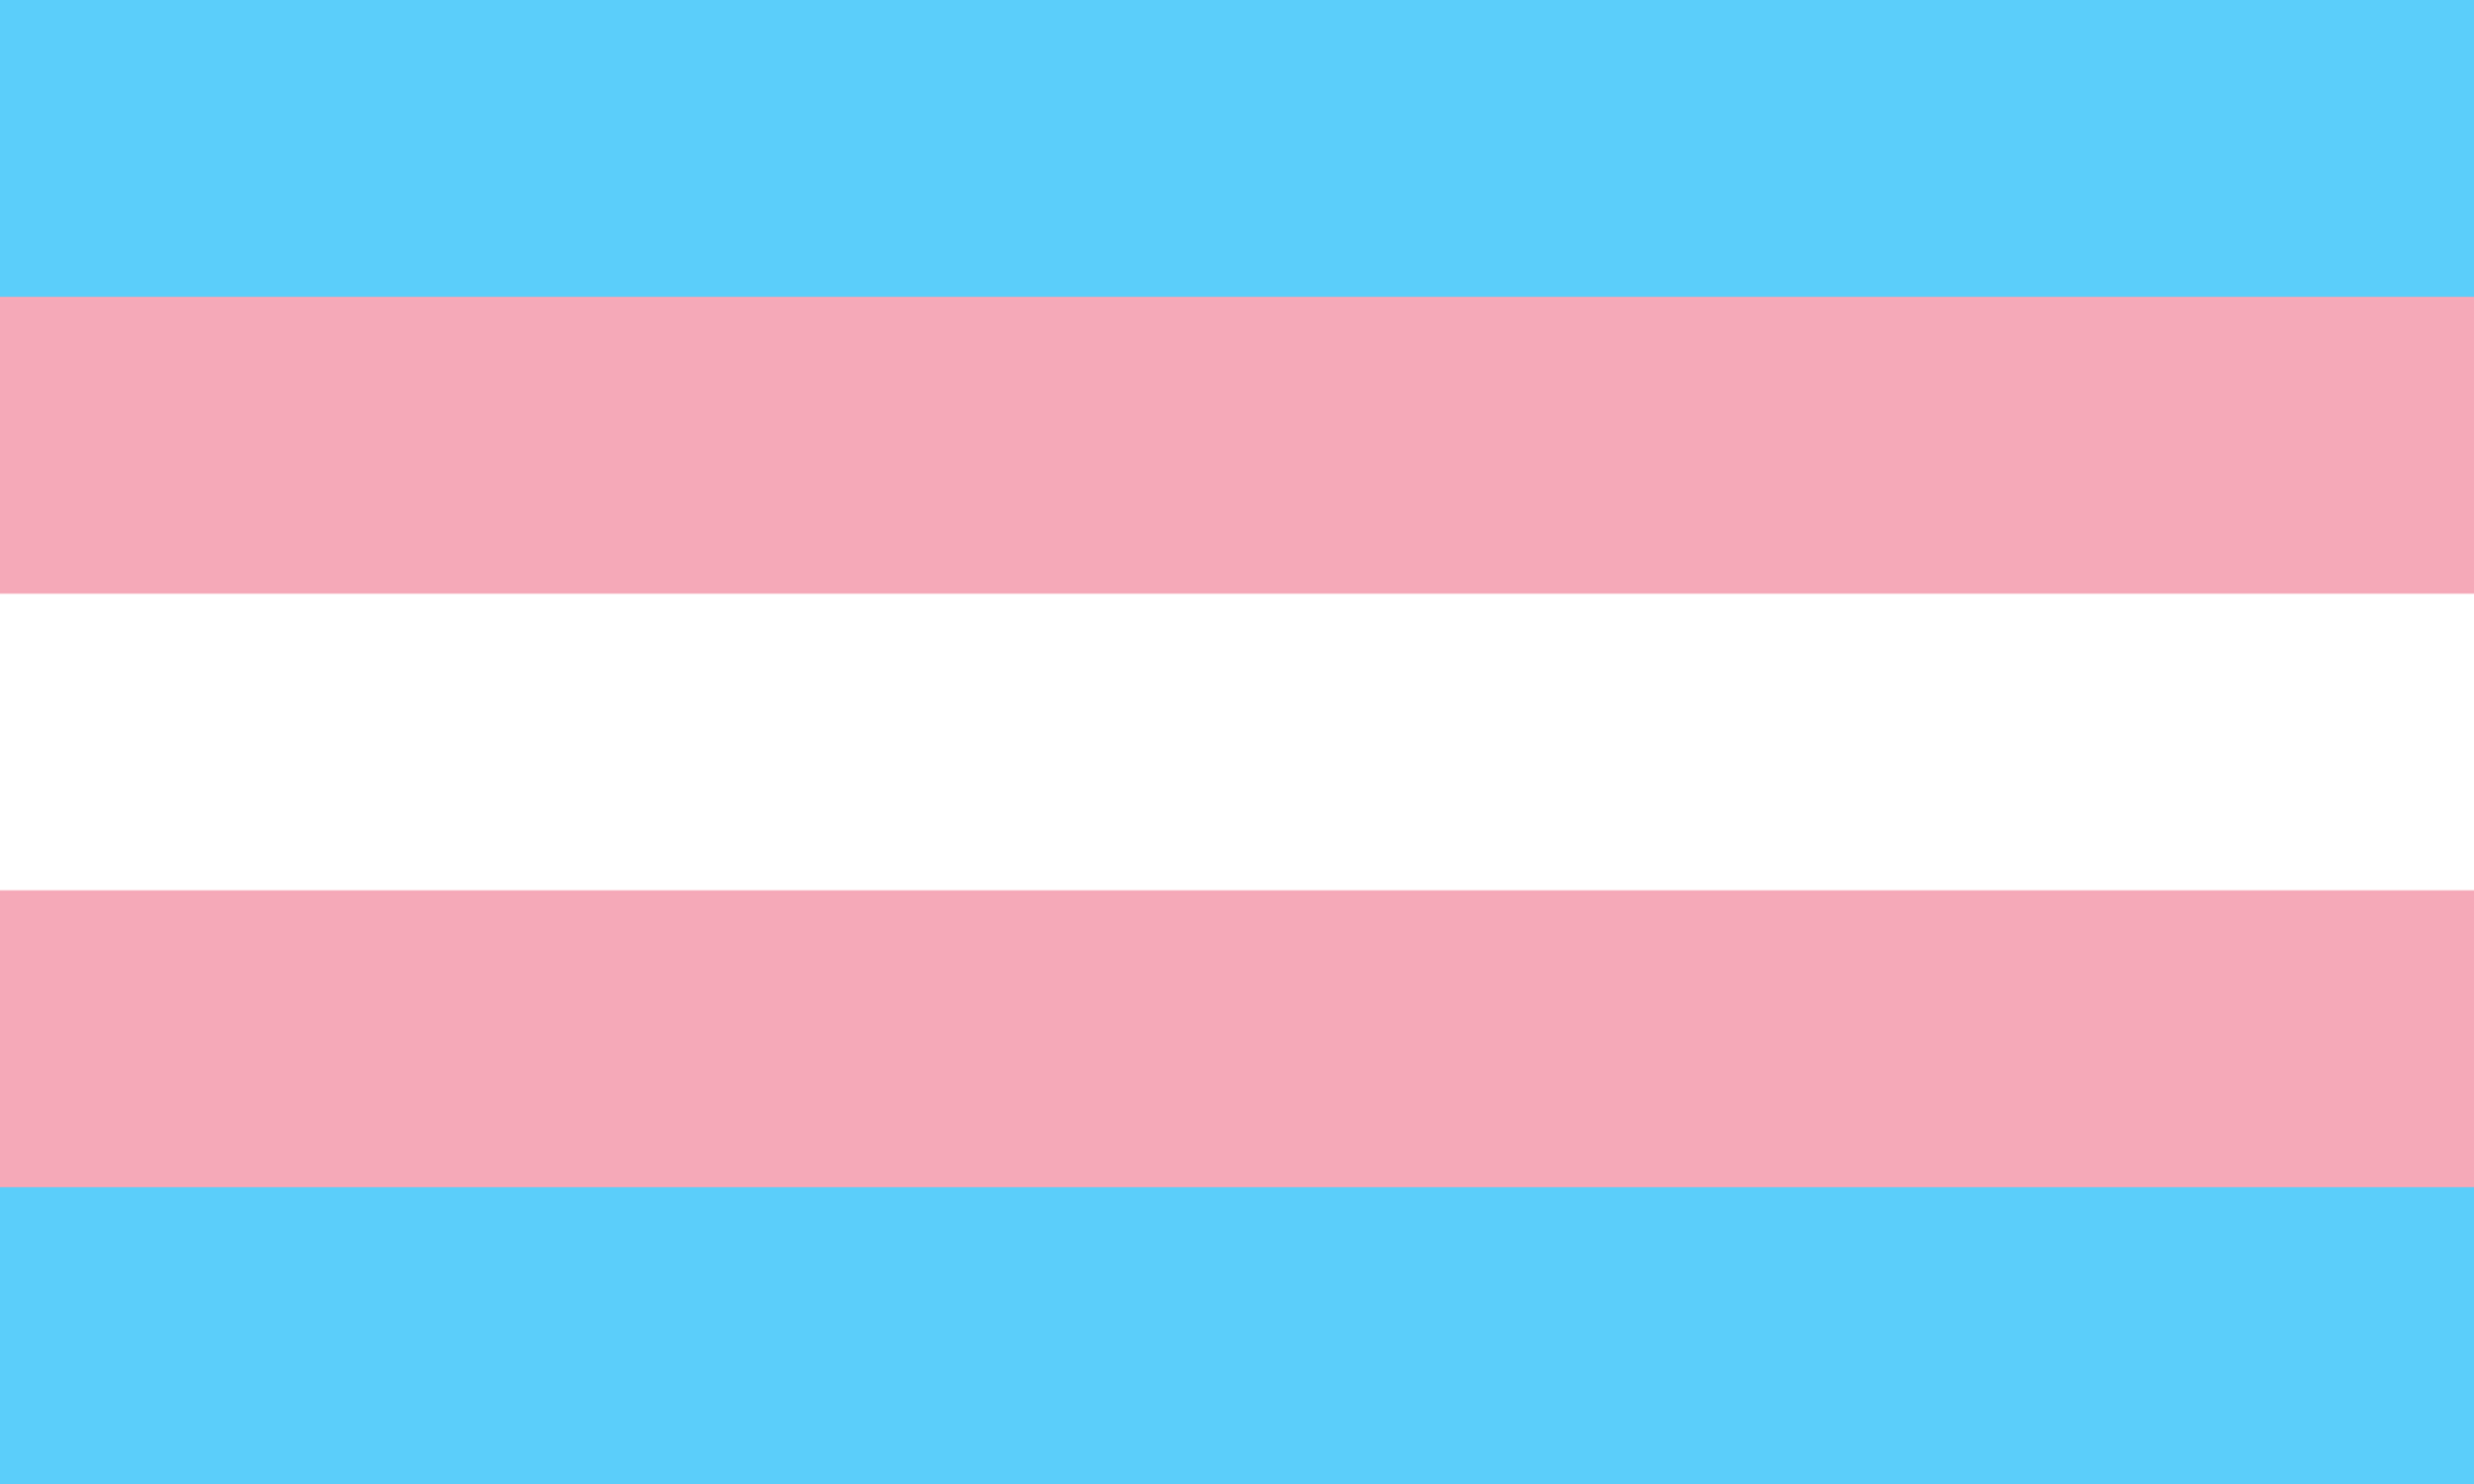 Transgender flag with five stripes: Blue, pink, white, pink and blue to represent male to female and female to male transitions.